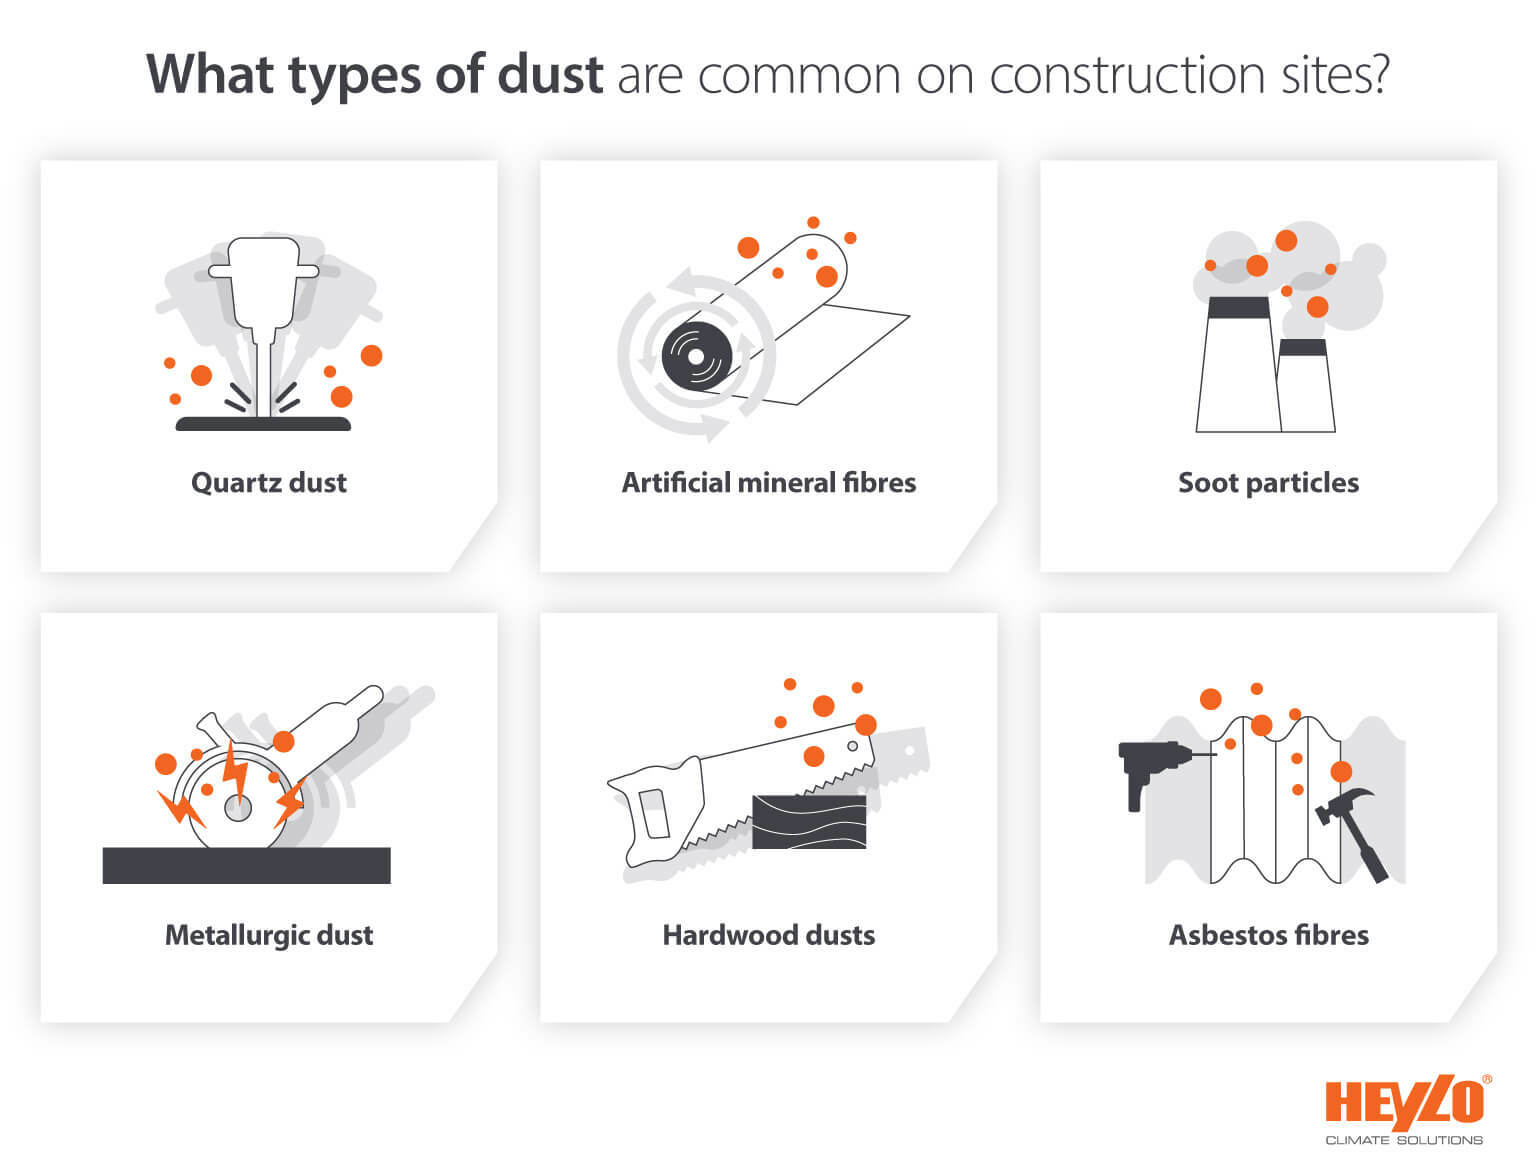 Types of dust and contaminated particles found on construction and building sites